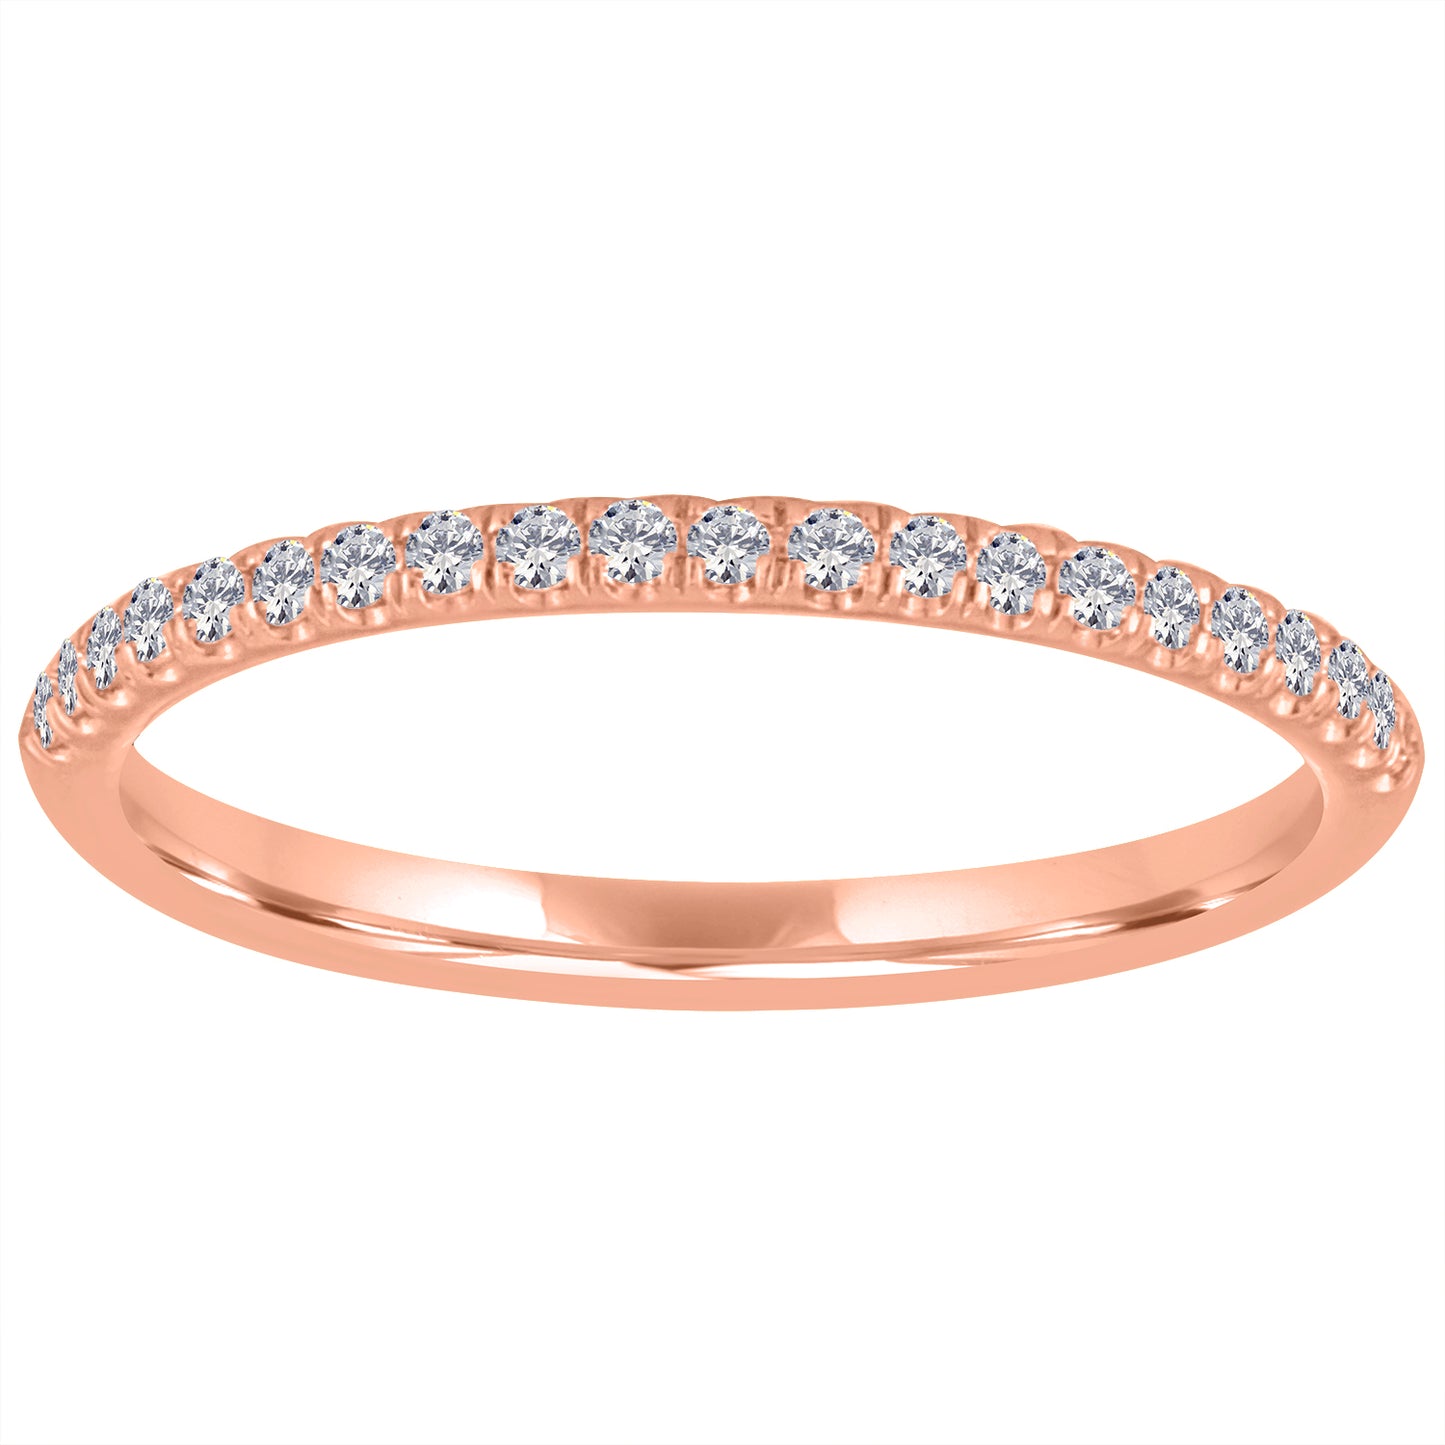 Rose gold skinny band with round diamonds.